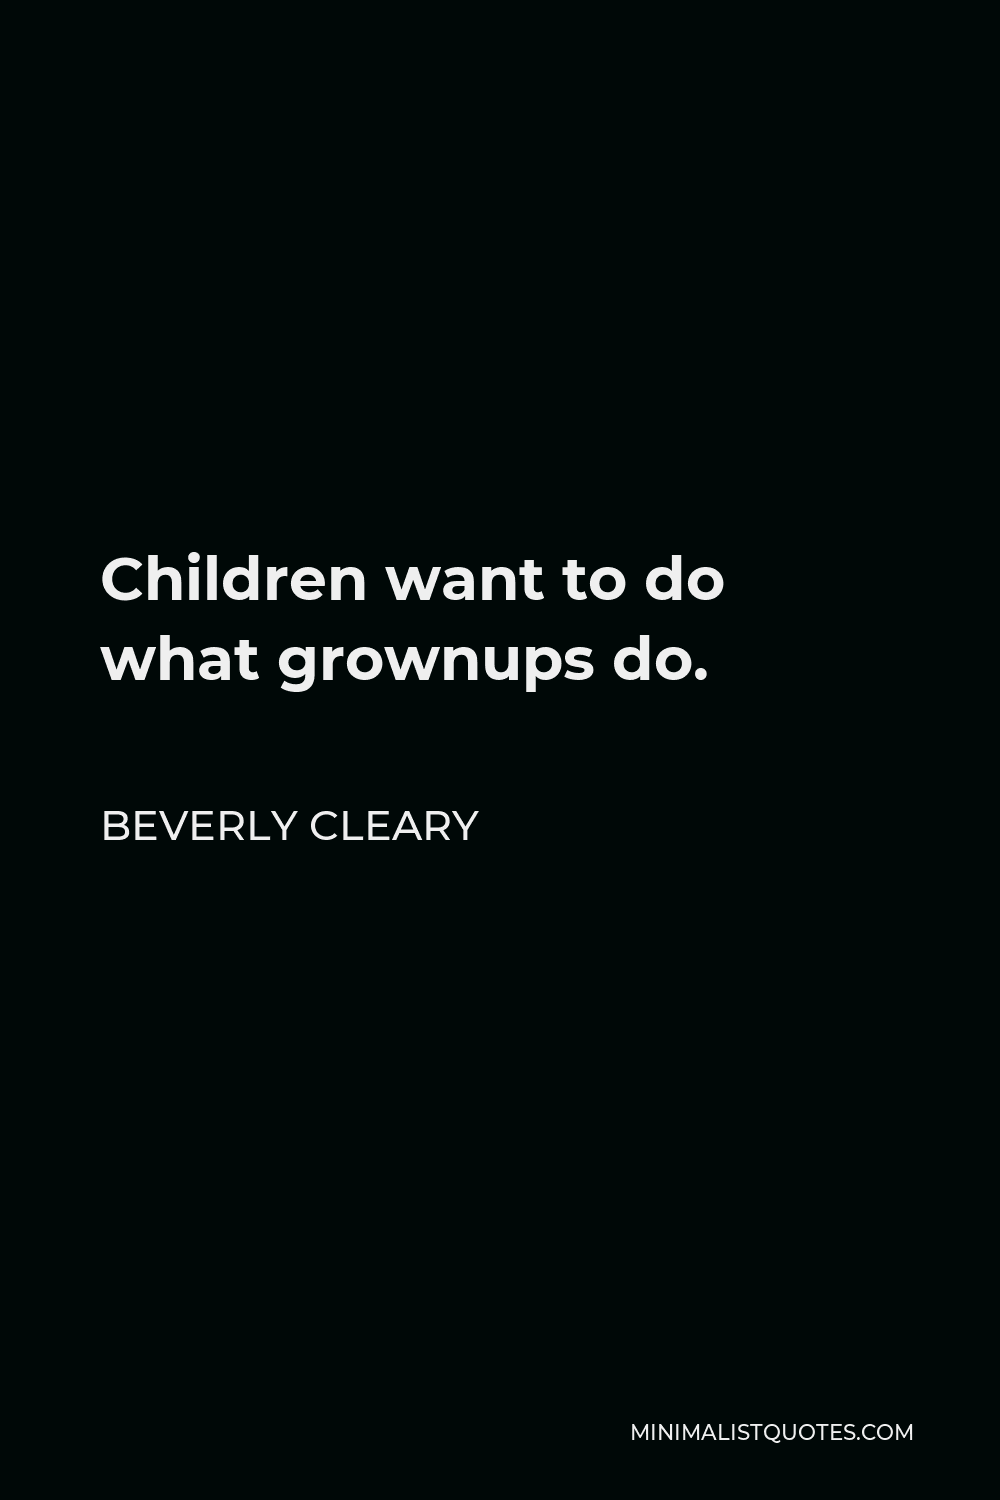 Beverly Cleary Quote - Children want to do what grownups do.